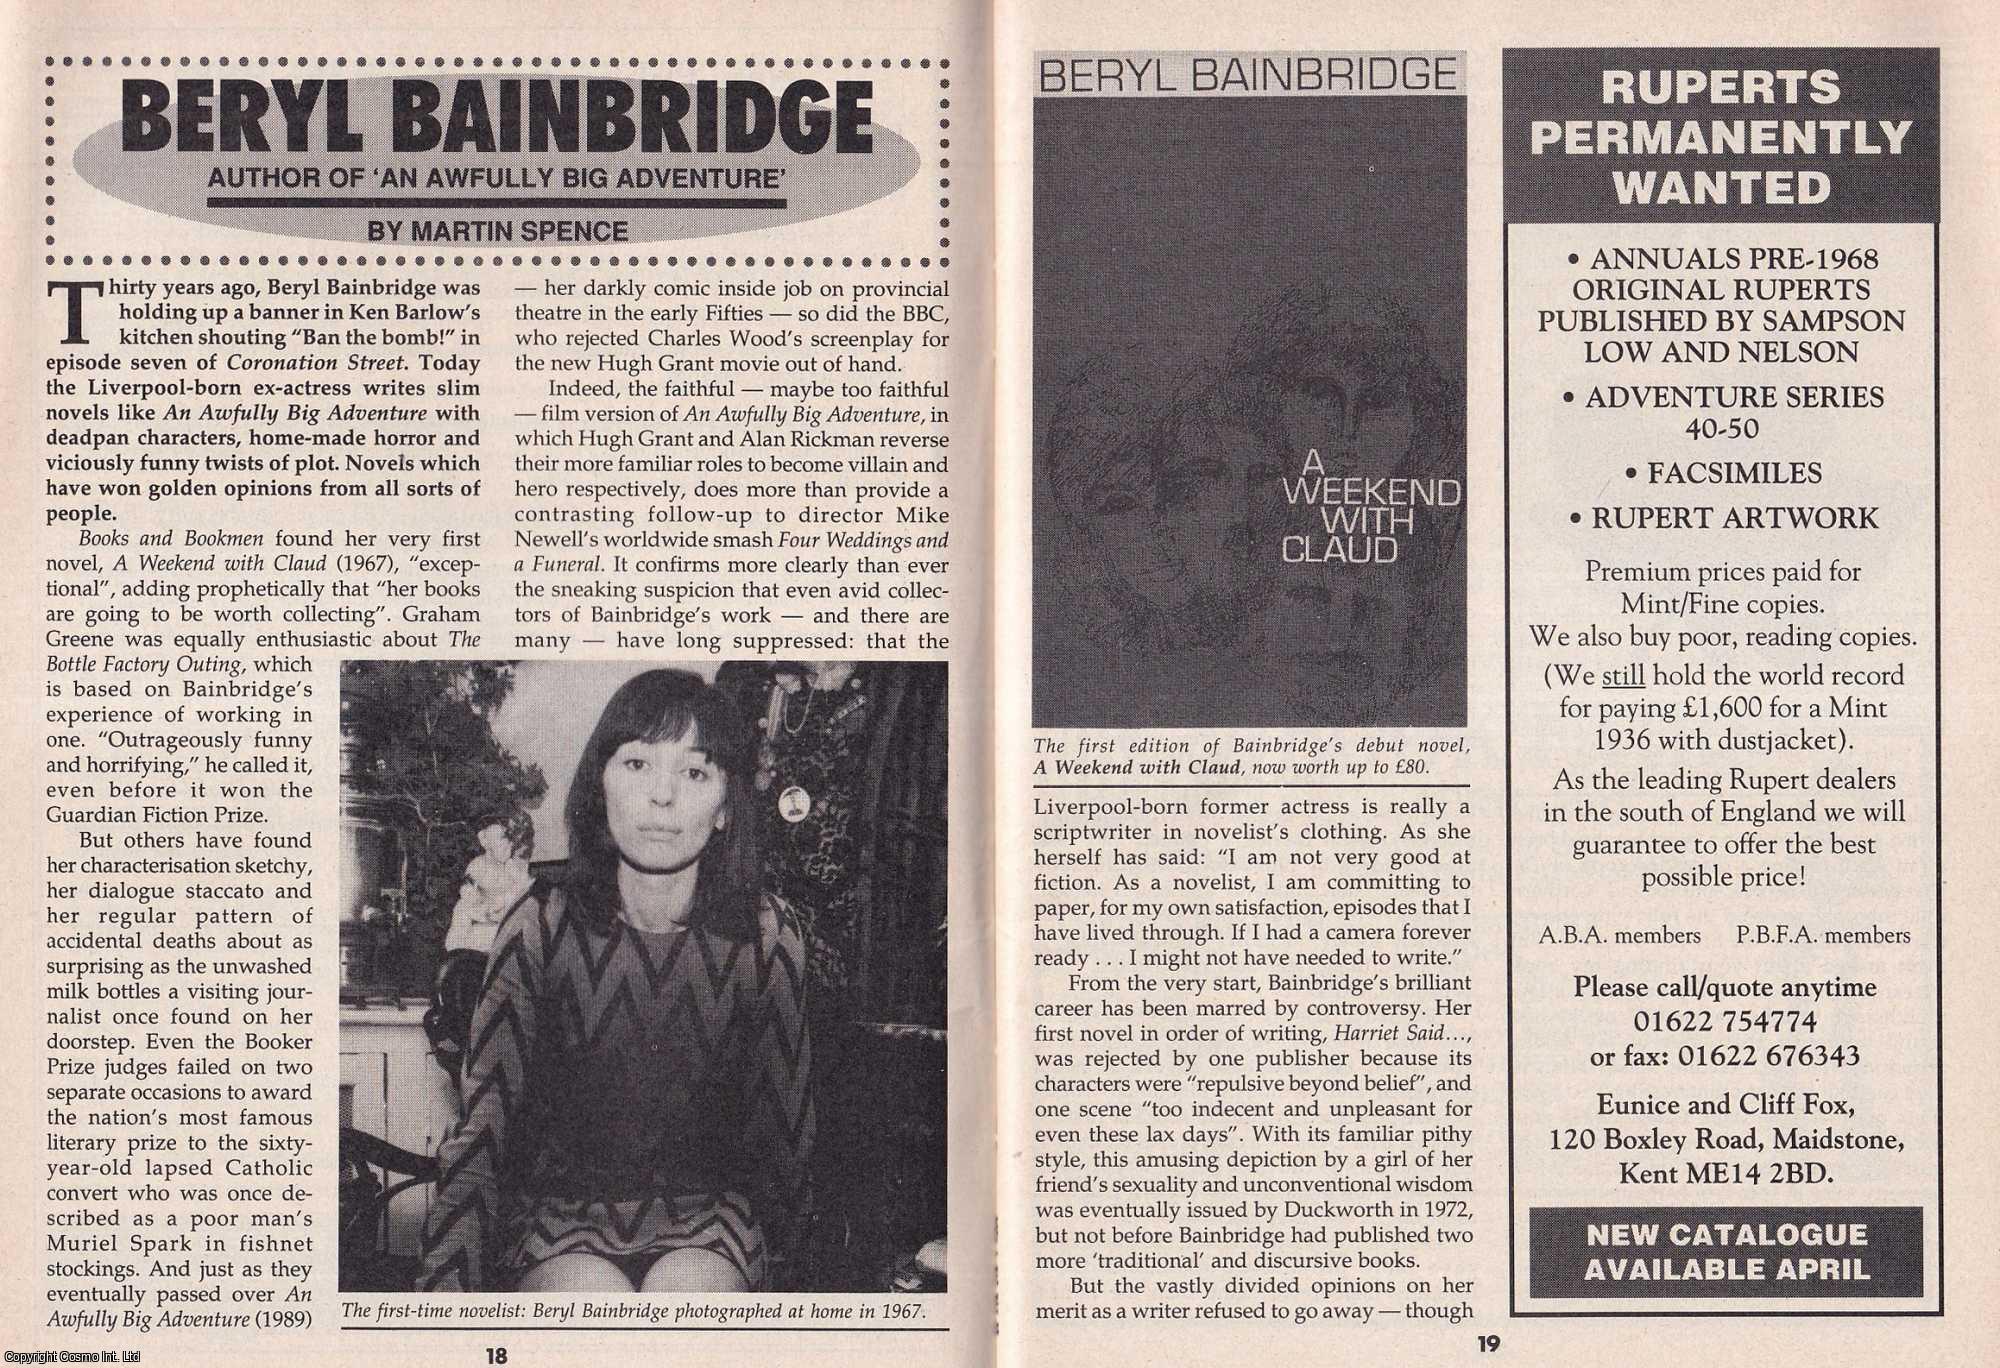 Martin Spence - Beryl Bainbridge. Author of An Awfully Big Adventure. This is an original article separated from an issue of The Book & Magazine Collector publication.